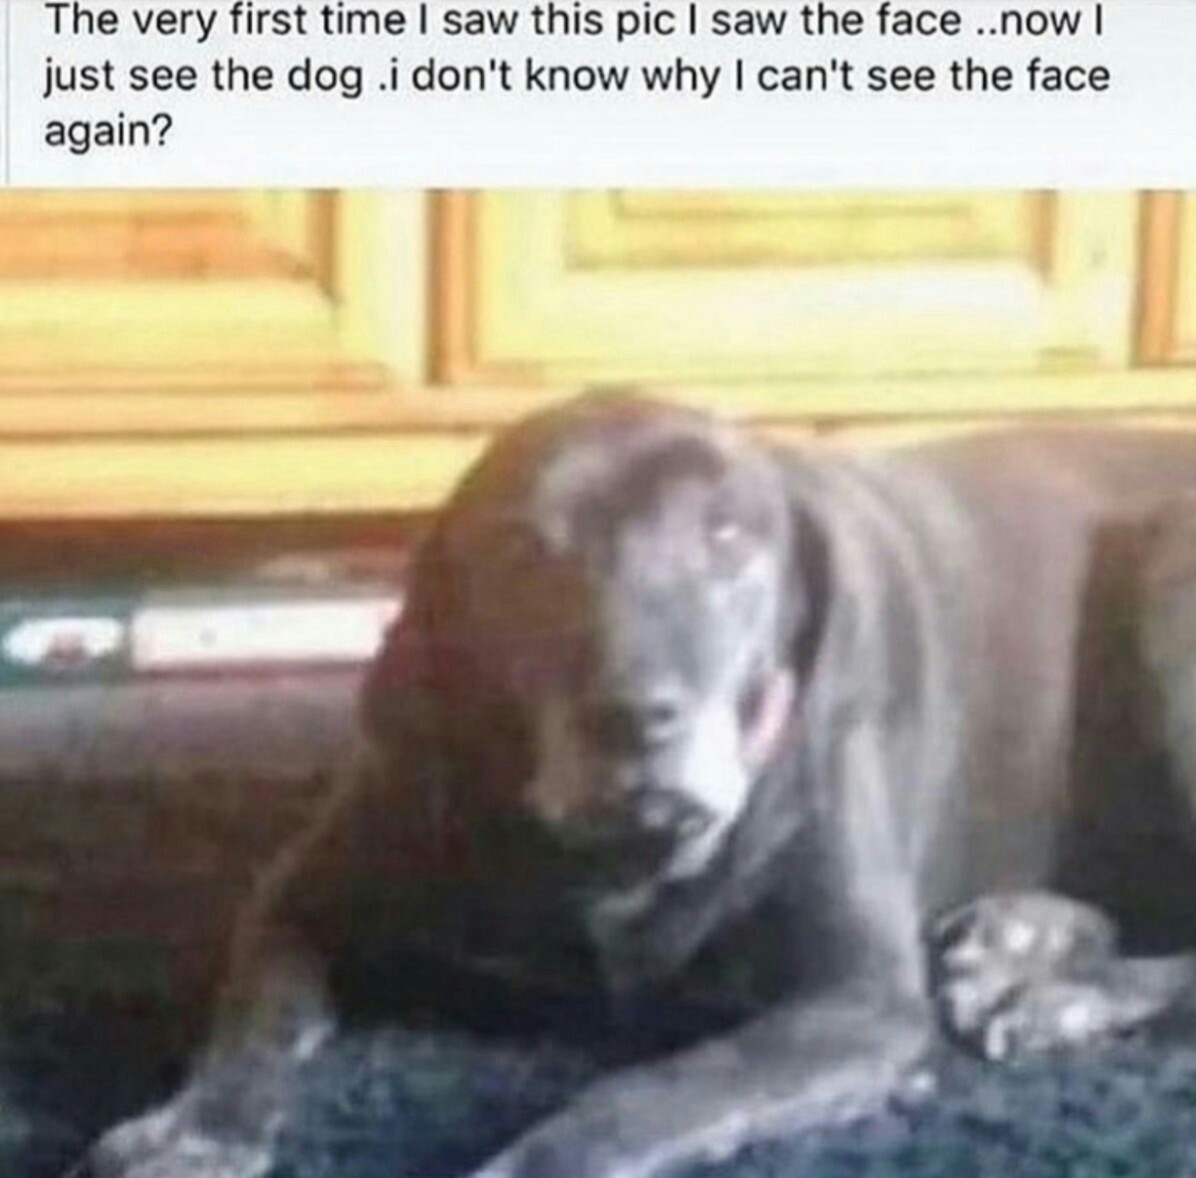 At first all I could see was the creepy face. The face is looking down and towards the left, nose is dog's left eye, right jowl is creepy face nose, left jowl is cheek, face like burning Anakin Skywalker with creepy smile. Now I see dog face immediately. - meme